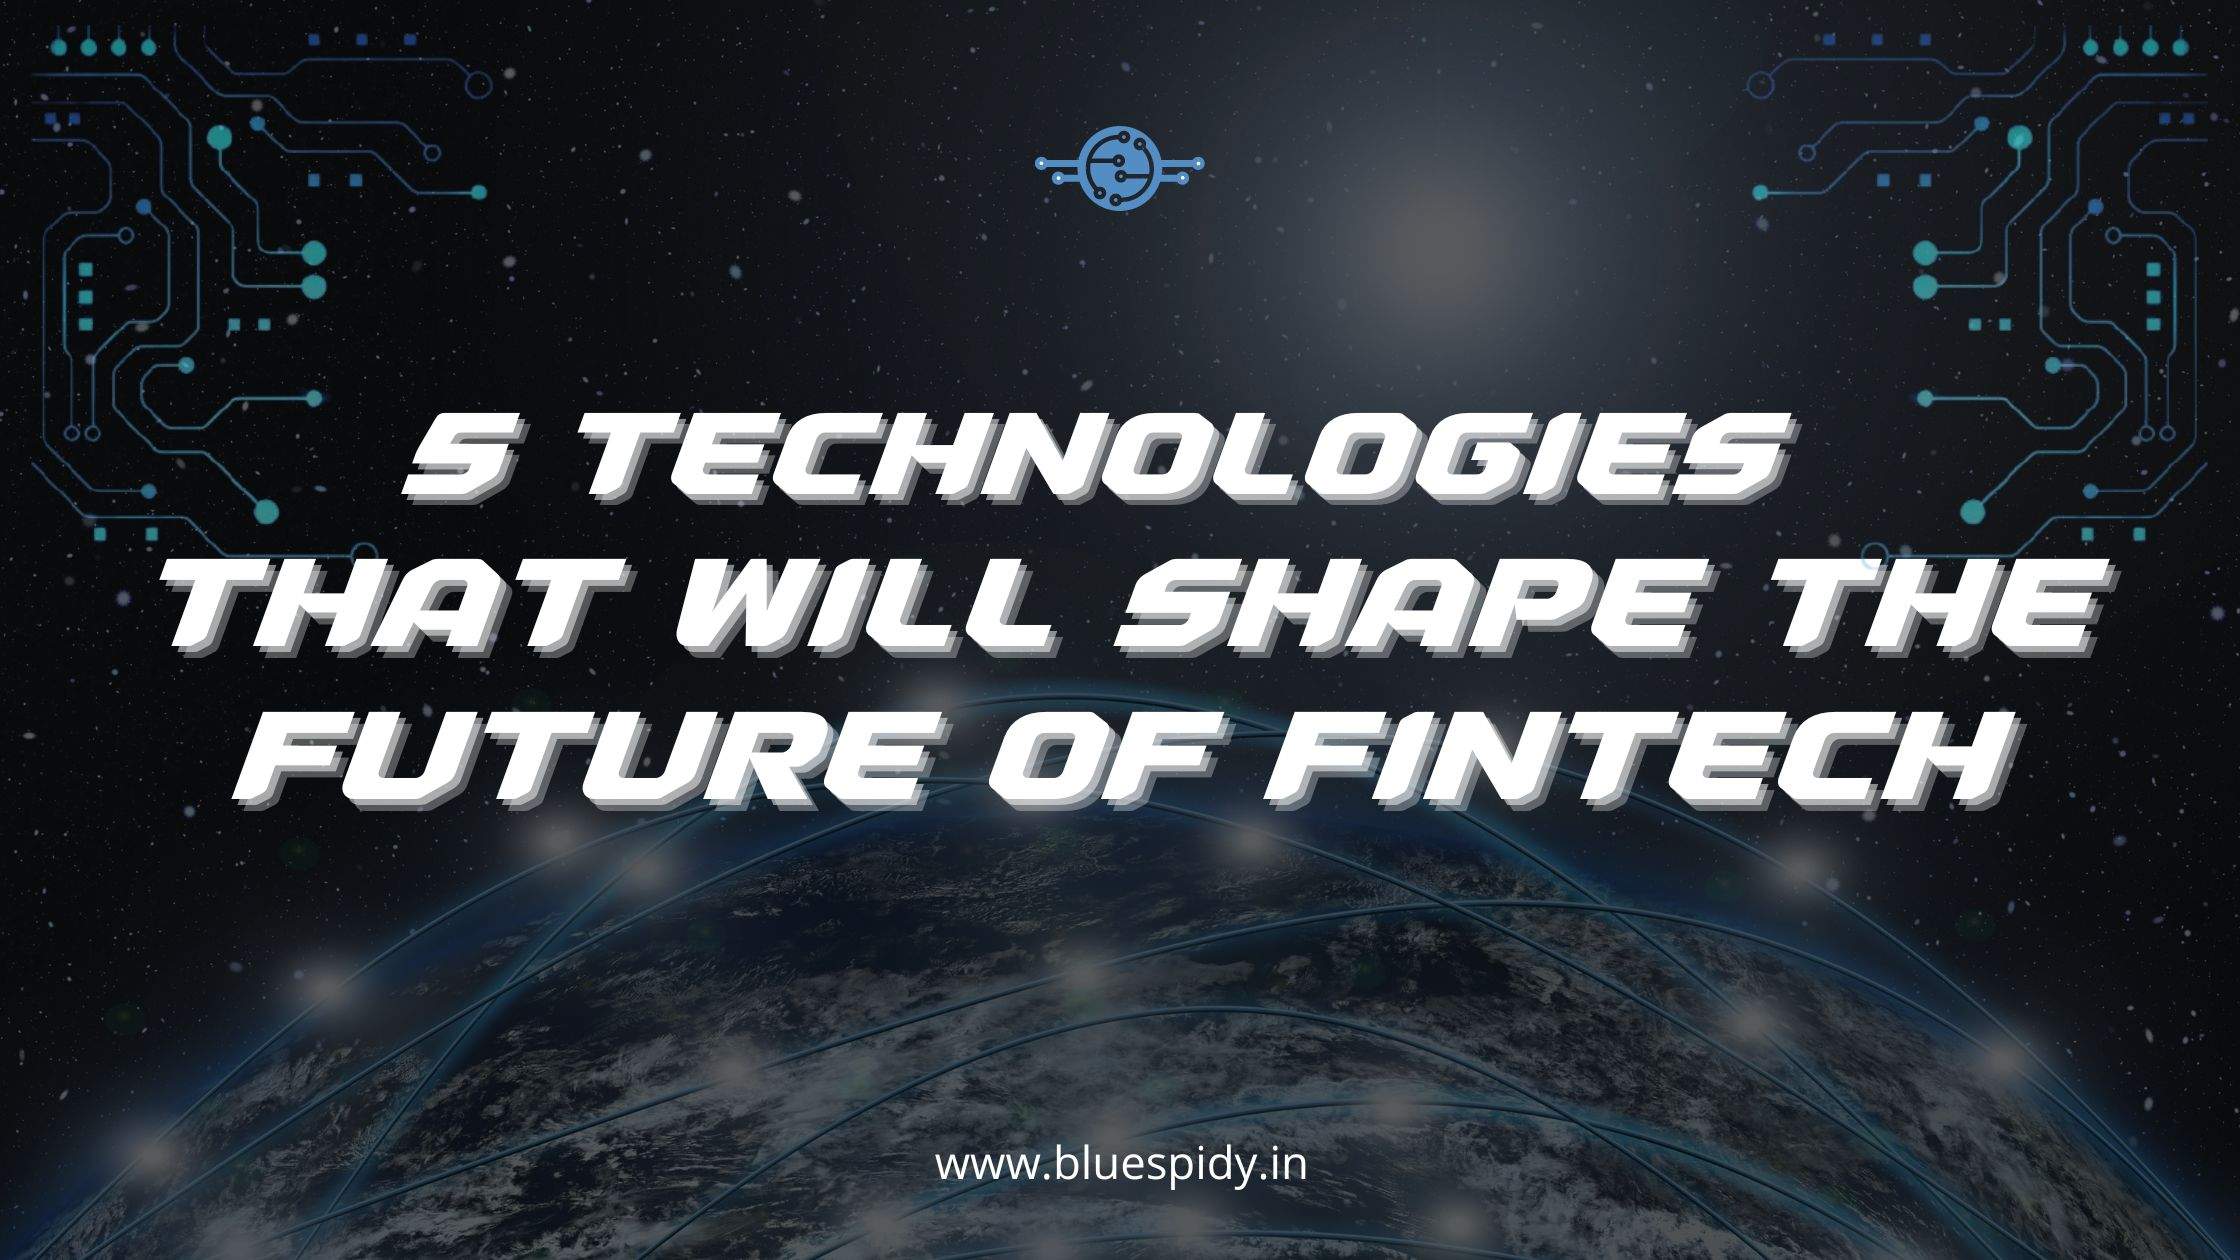 5 Technologies That Will Shape the Future of Fintech